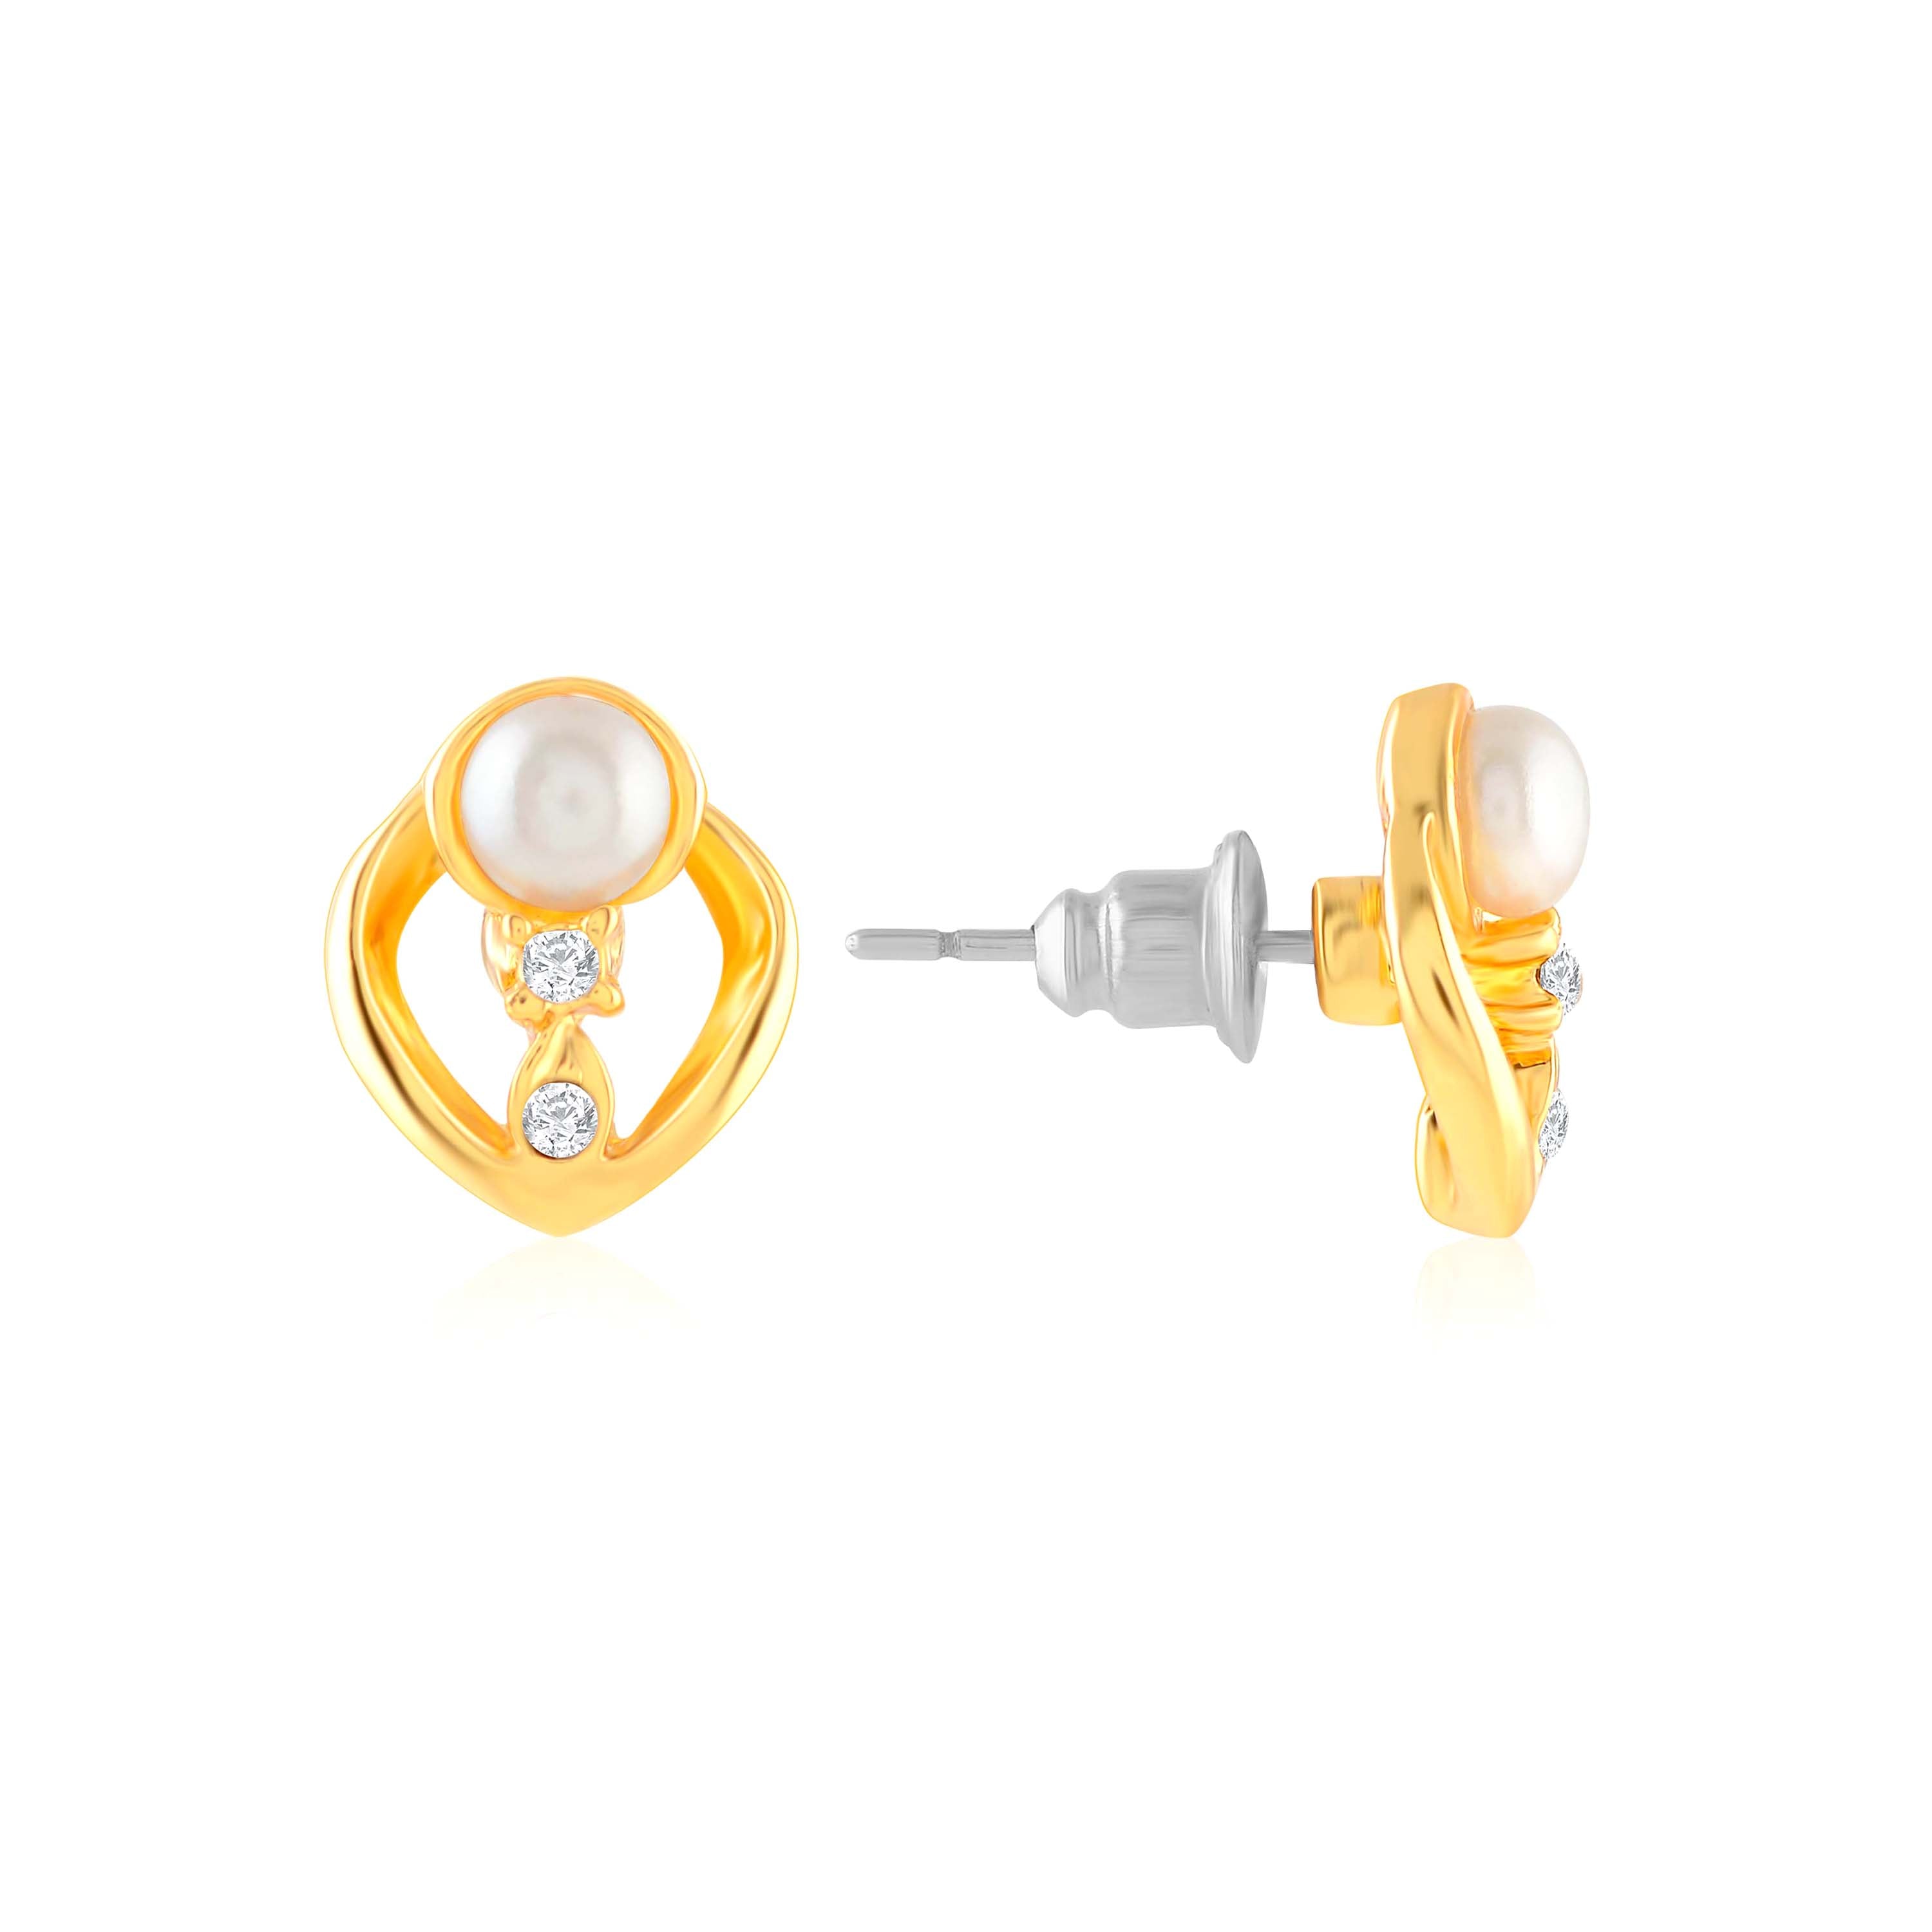 Stylish Gold Plated Pearl Studs Earrings